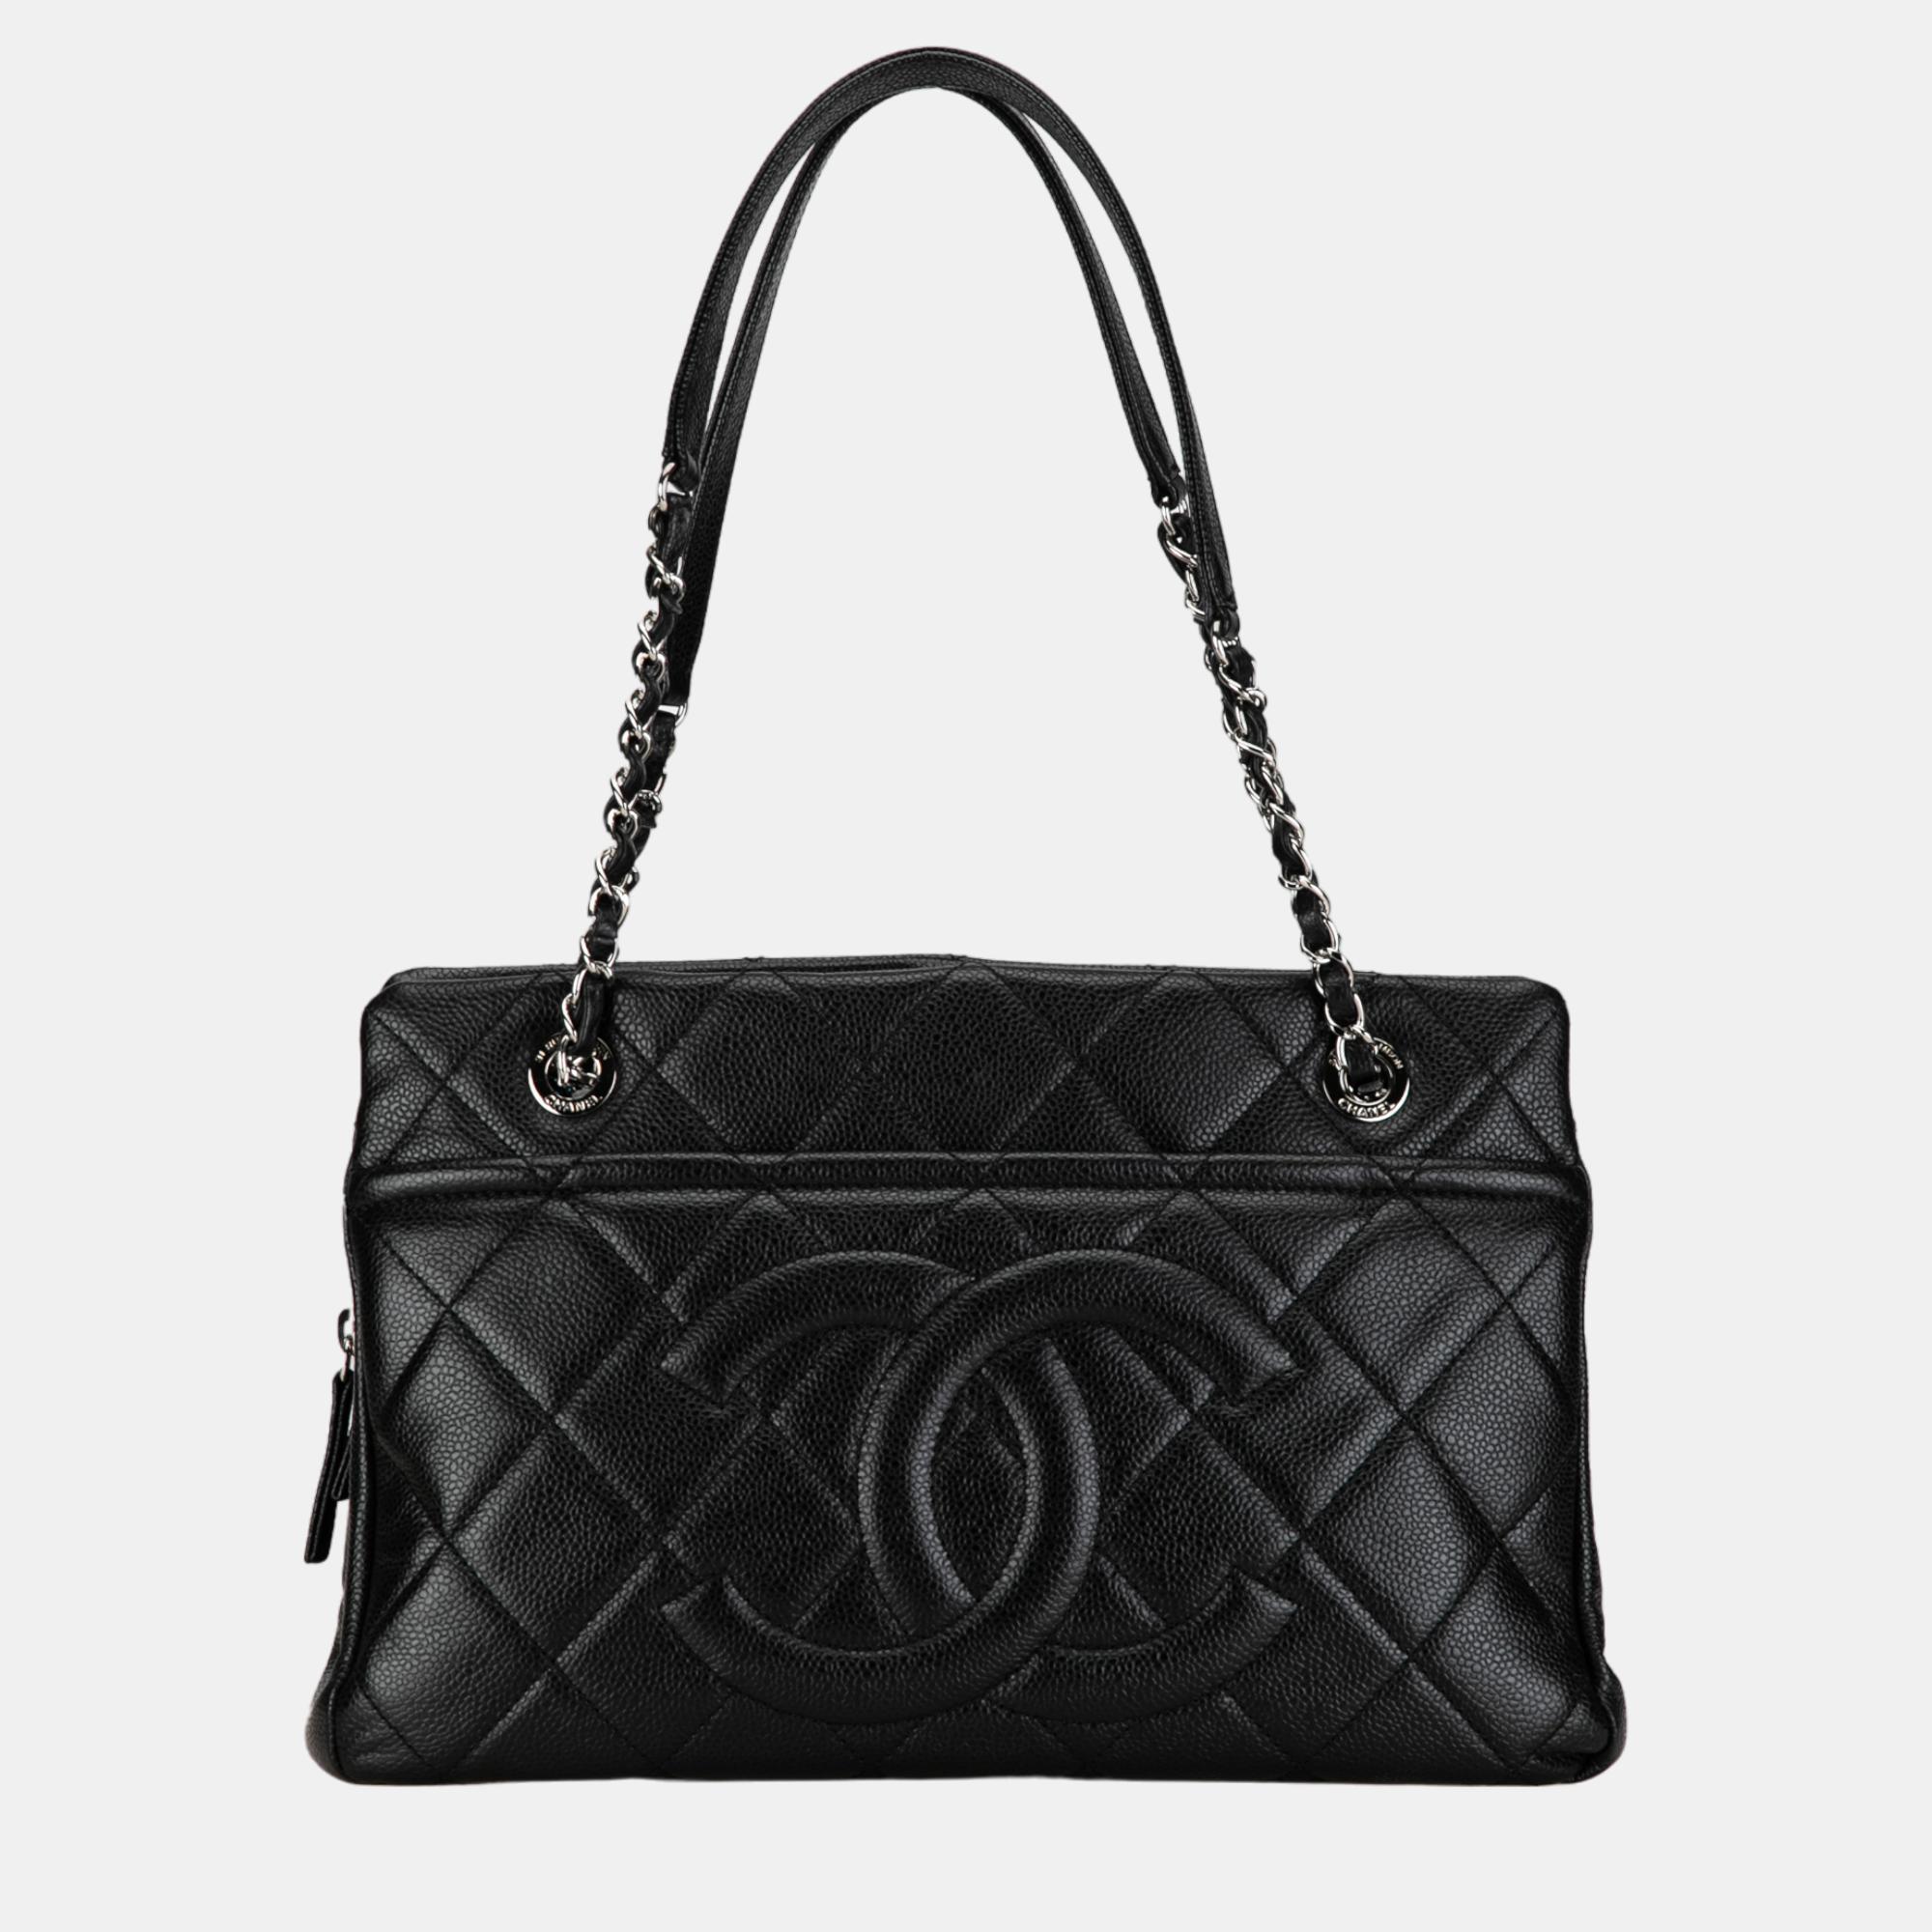 Pre-owned Chanel Black Cc Quilted Caviar Soft Tote